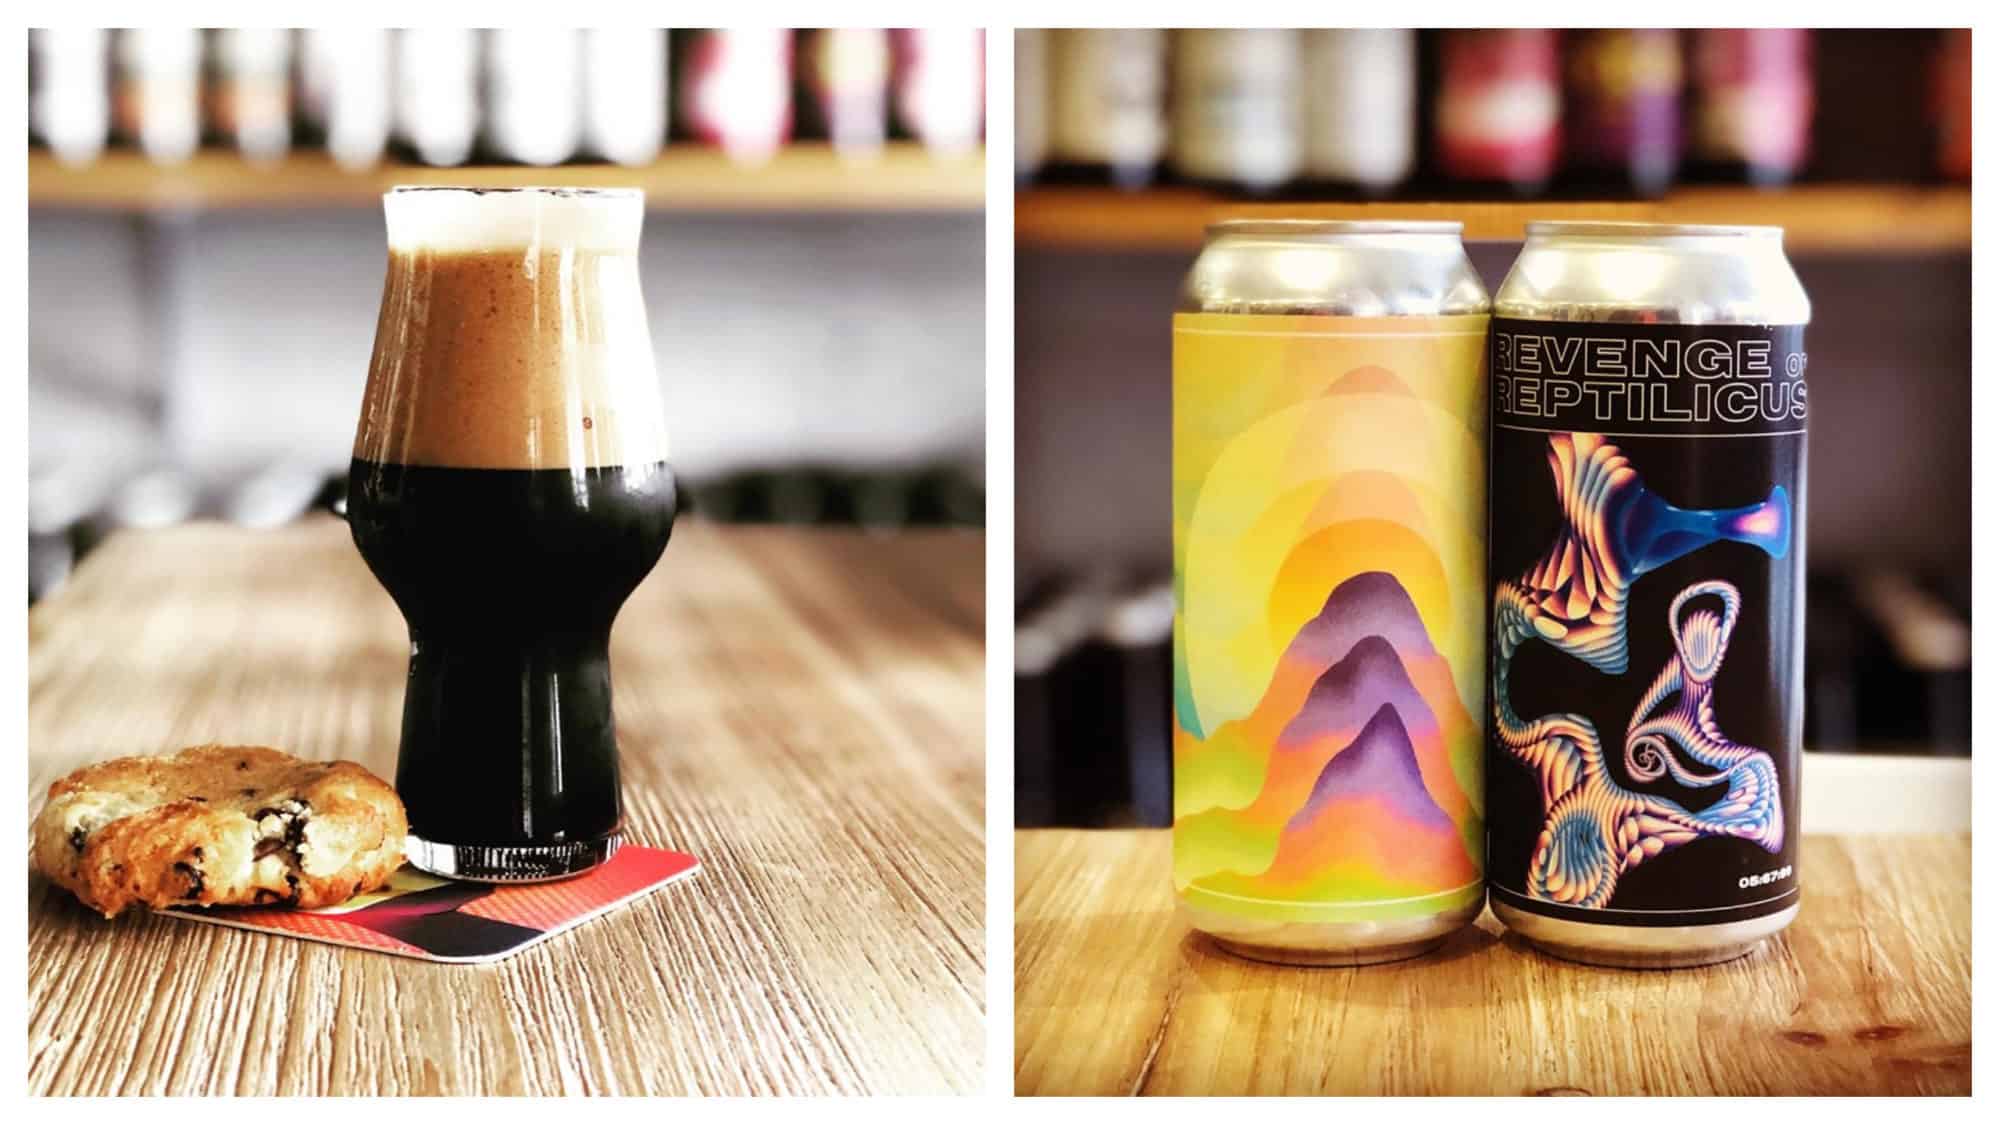 A glass of lager beer with a cookie on a wooden counter (left). Two cans of craft beer with psychedelic designs (right).